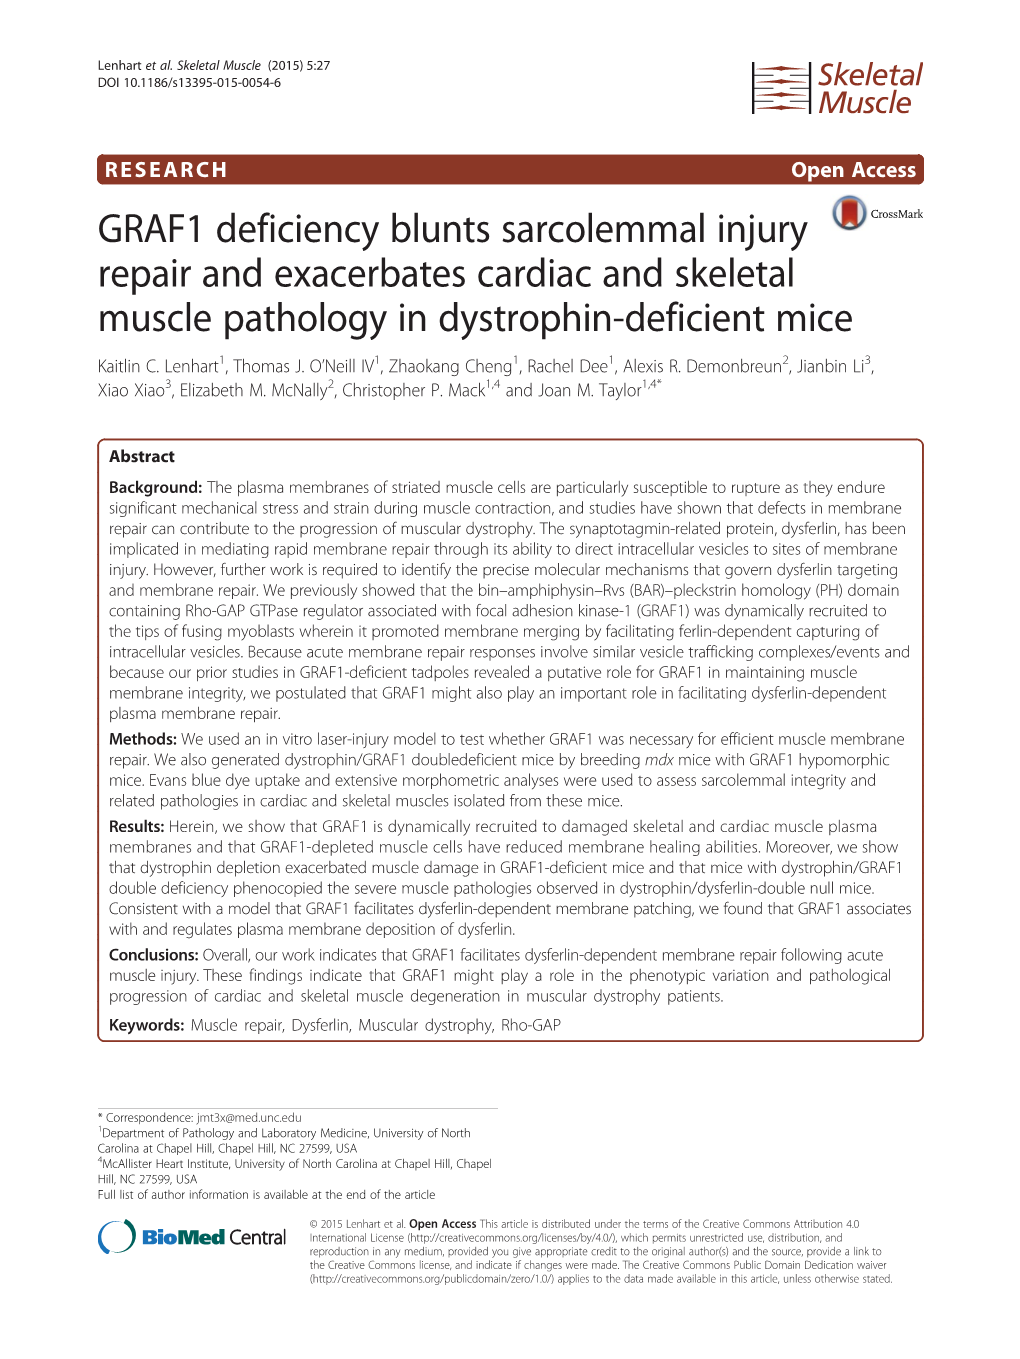 GRAF1 Deficiency Blunts Sarcolemmal Injury Repair and Exacerbates Cardiac and Skeletal Muscle Pathology in Dystrophin-Deficient Mice Kaitlin C